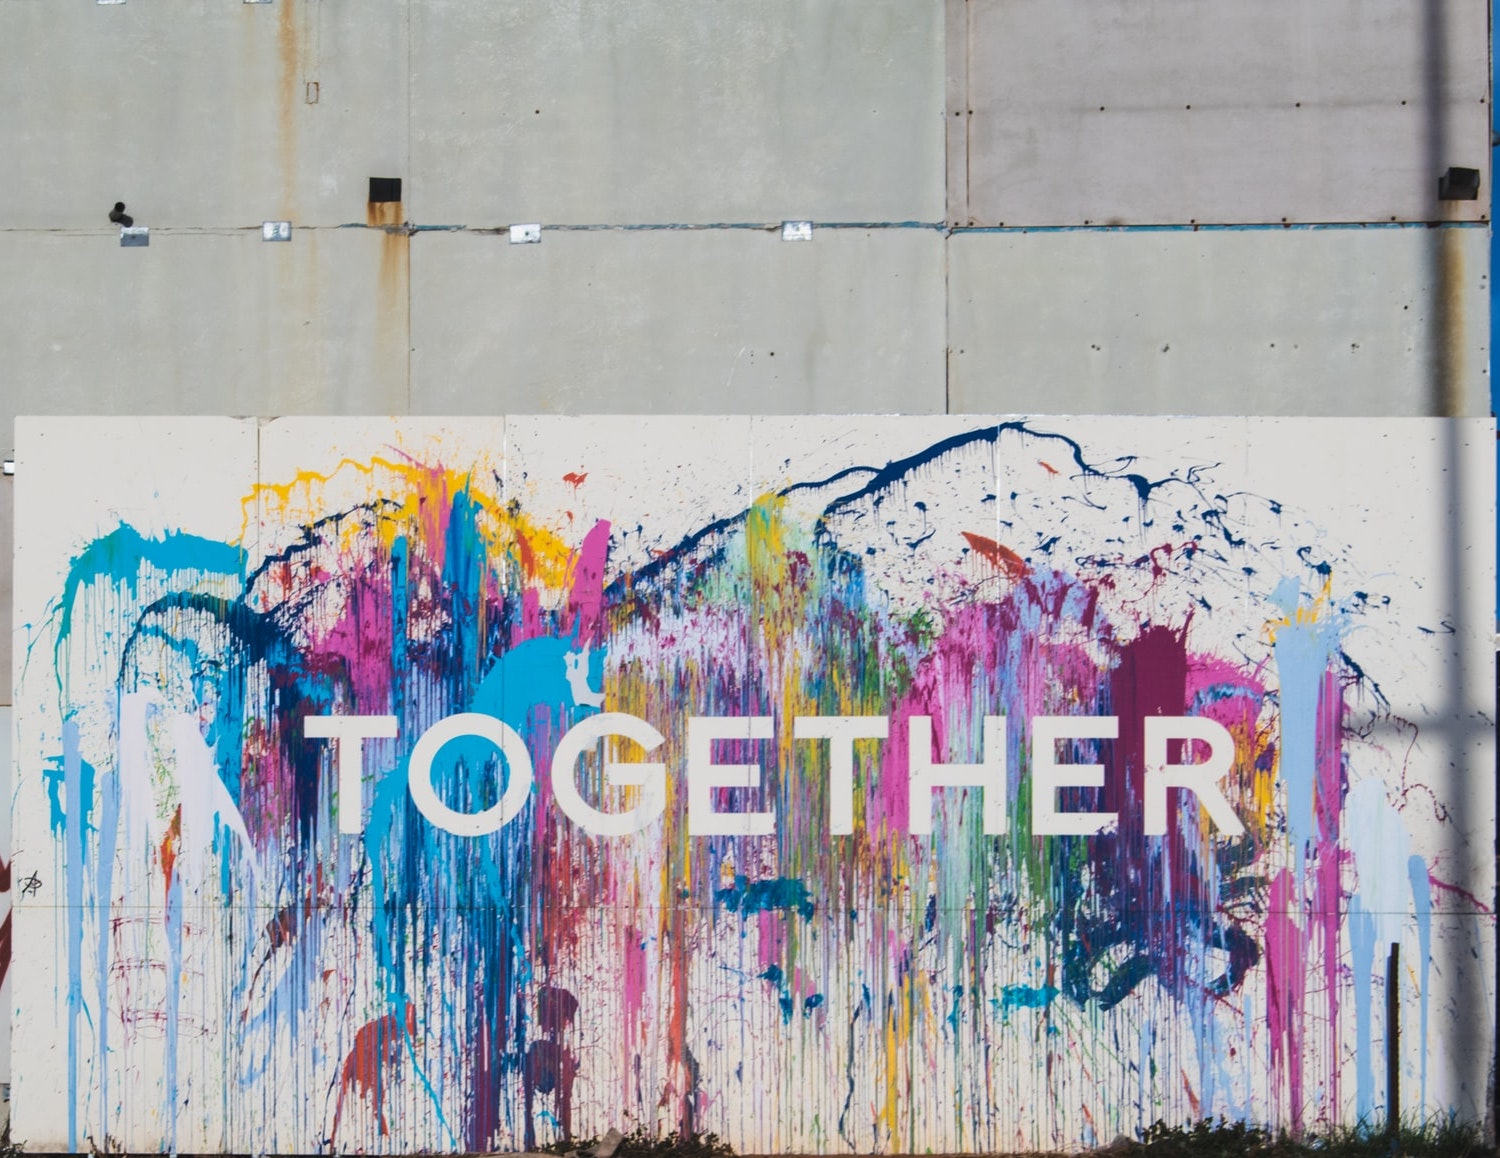 Colorful graffiti with the world "Together"